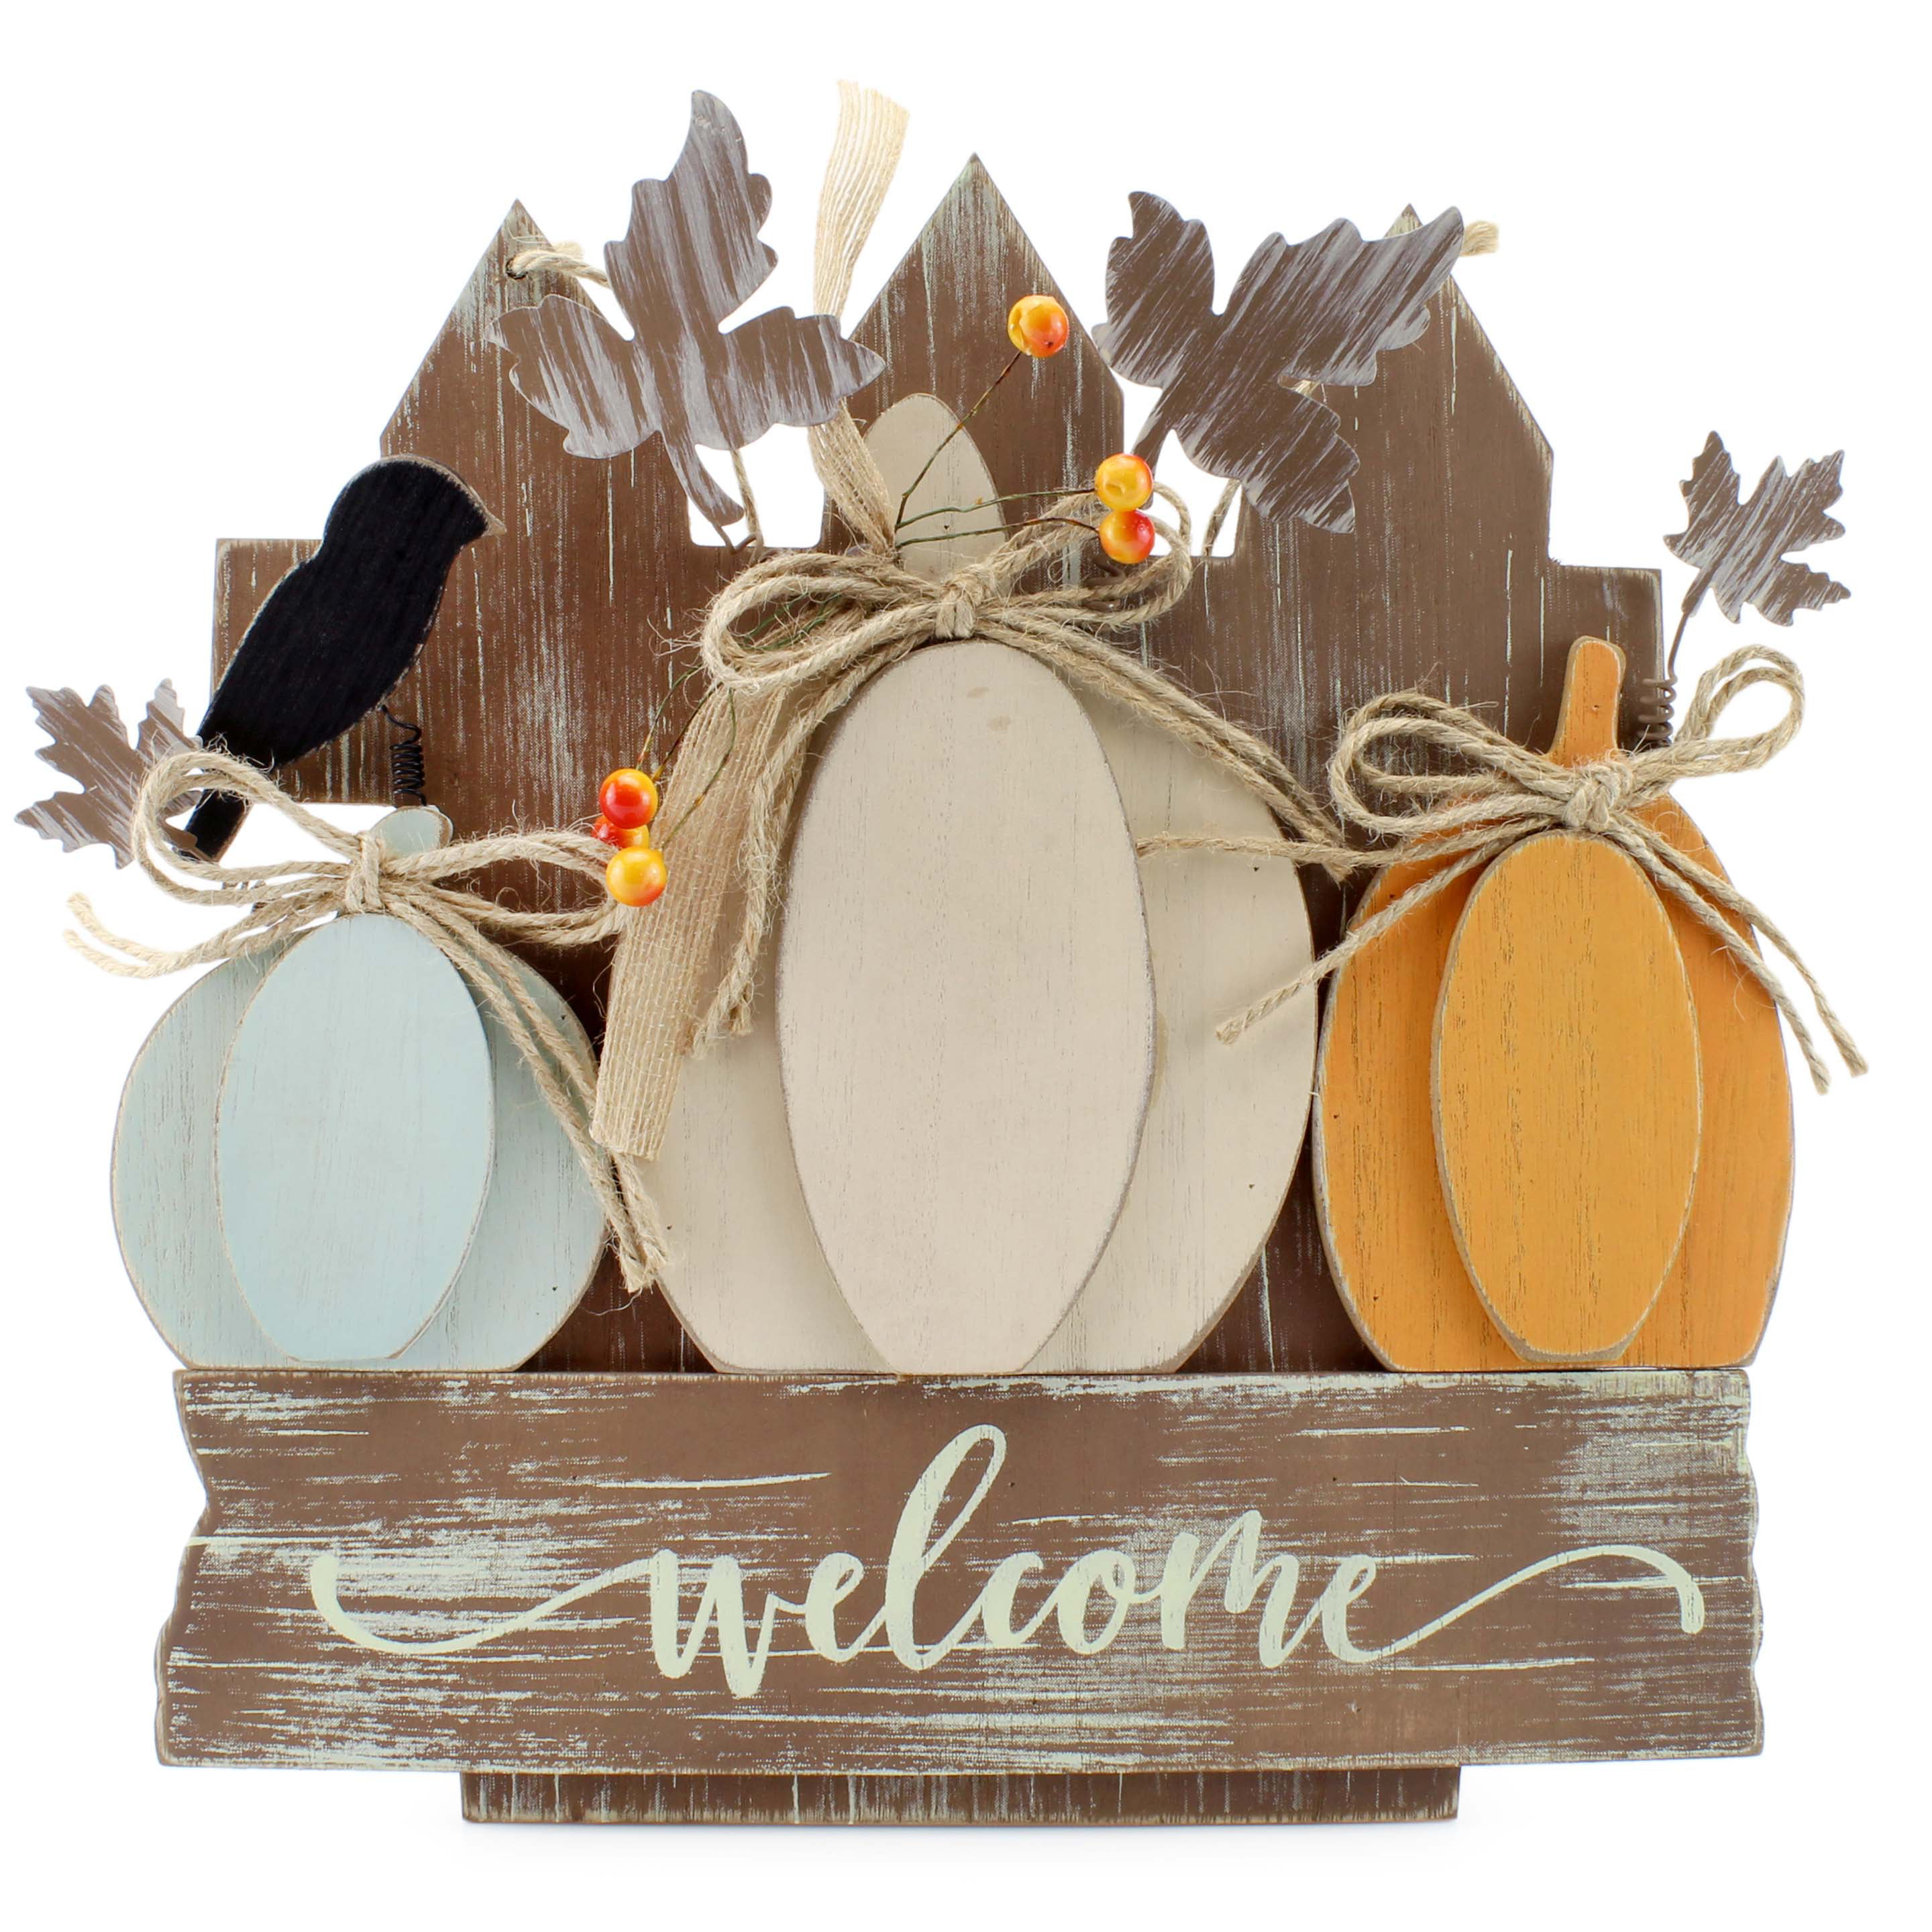 Wooden Door Decoration 12.5 x 12 Inches AuldHome Farmhouse Fall Door Sign